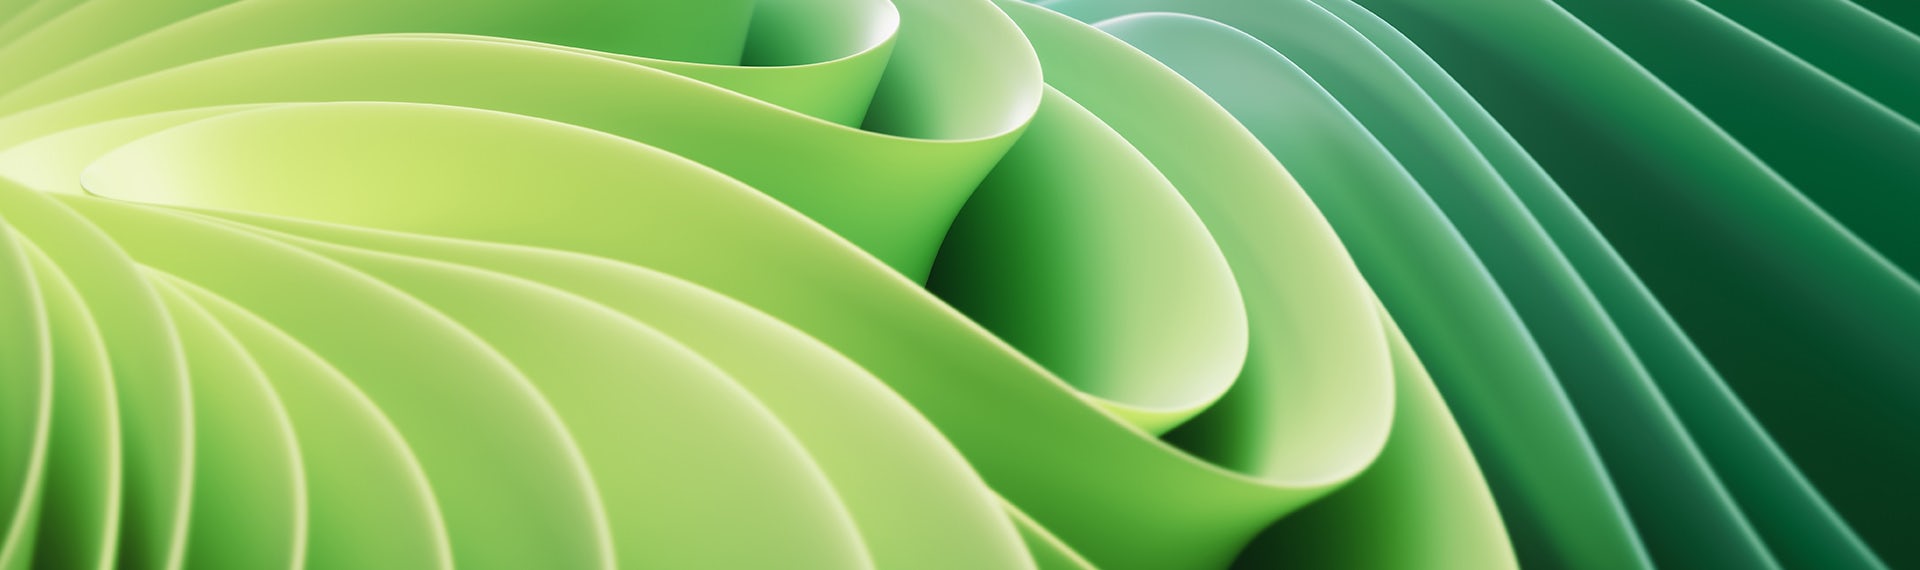 A green abstract background with wavy lines.